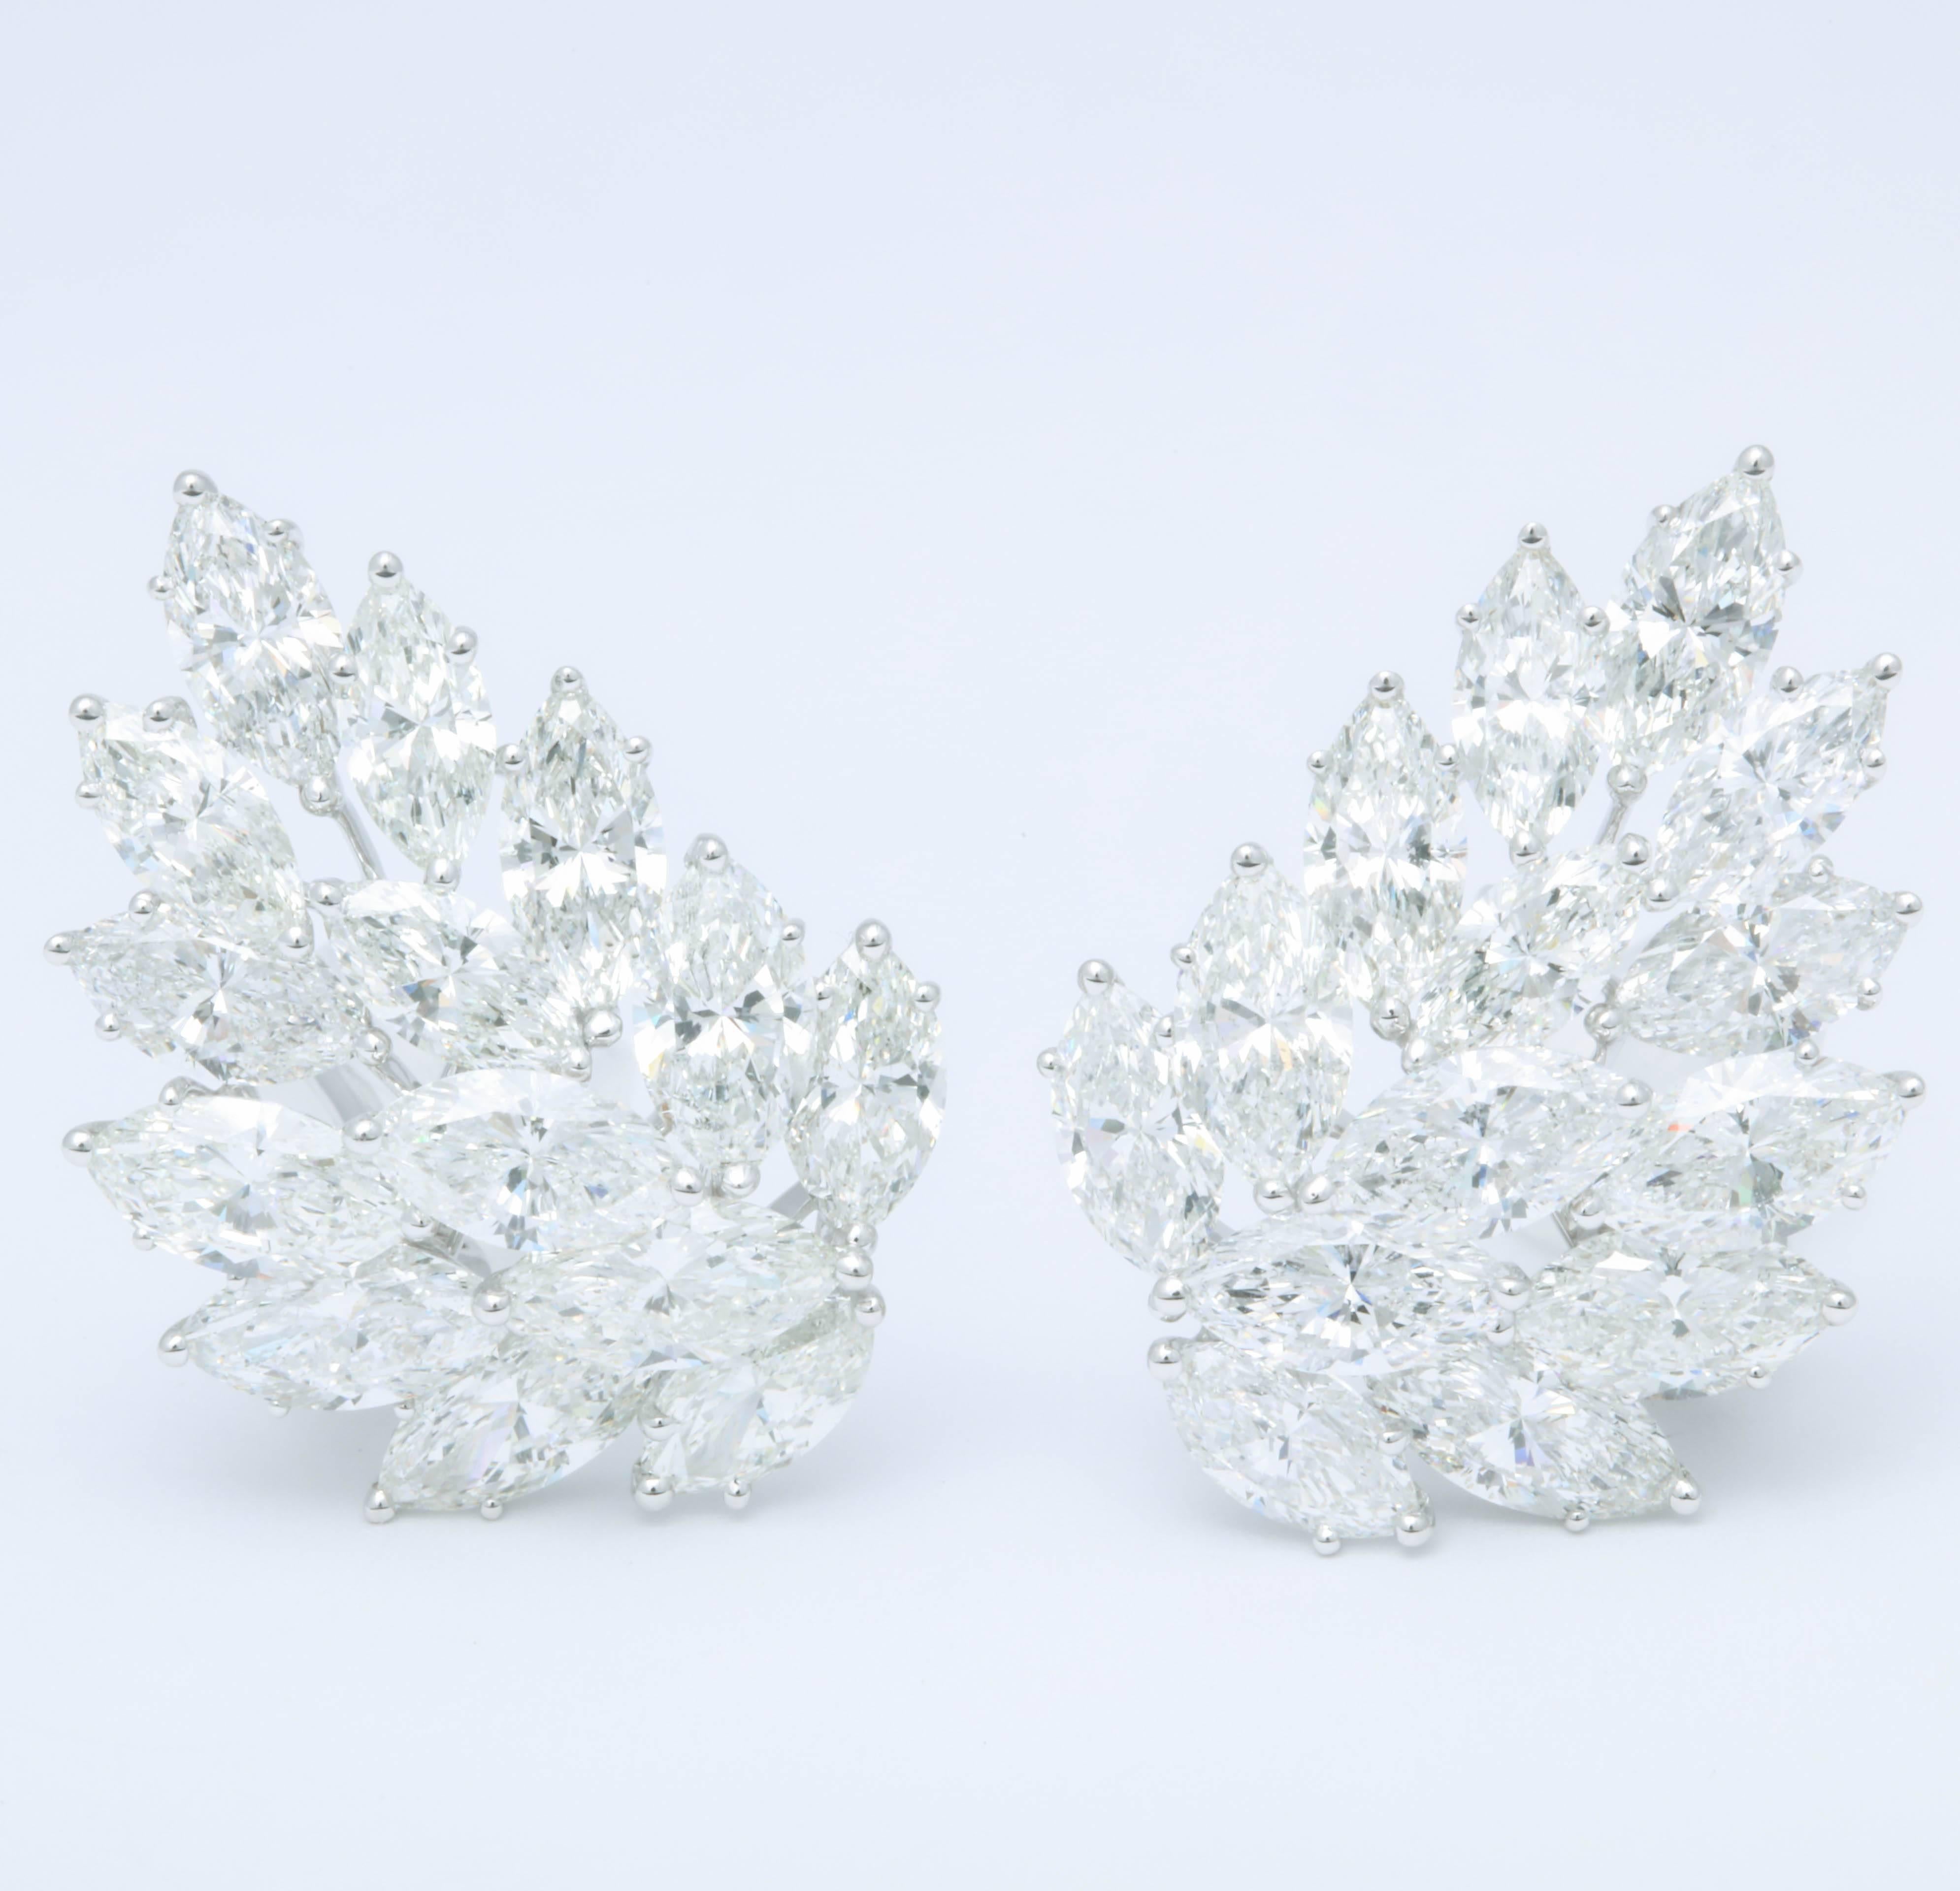 
A unique and modern take on diamond cluster earrings.

13.21 carats of white marquise cut diamonds set in 18k white gold.

These earrings were impeccably designed to cover the ear lobe and 